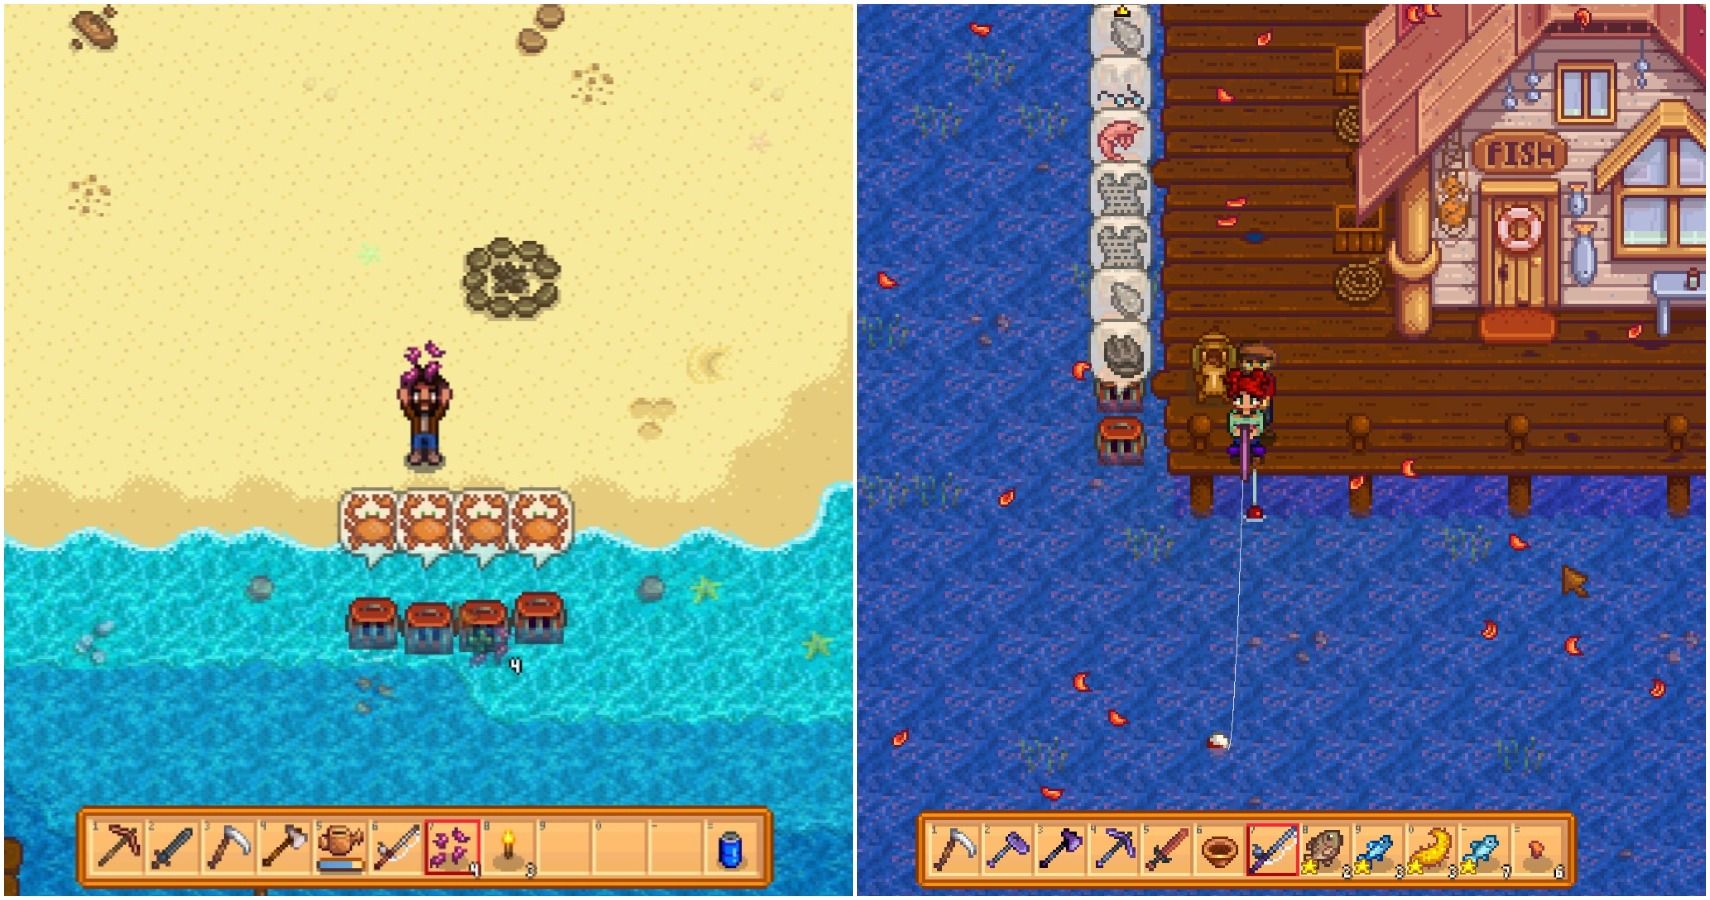 stardew valley fishing with bait guide